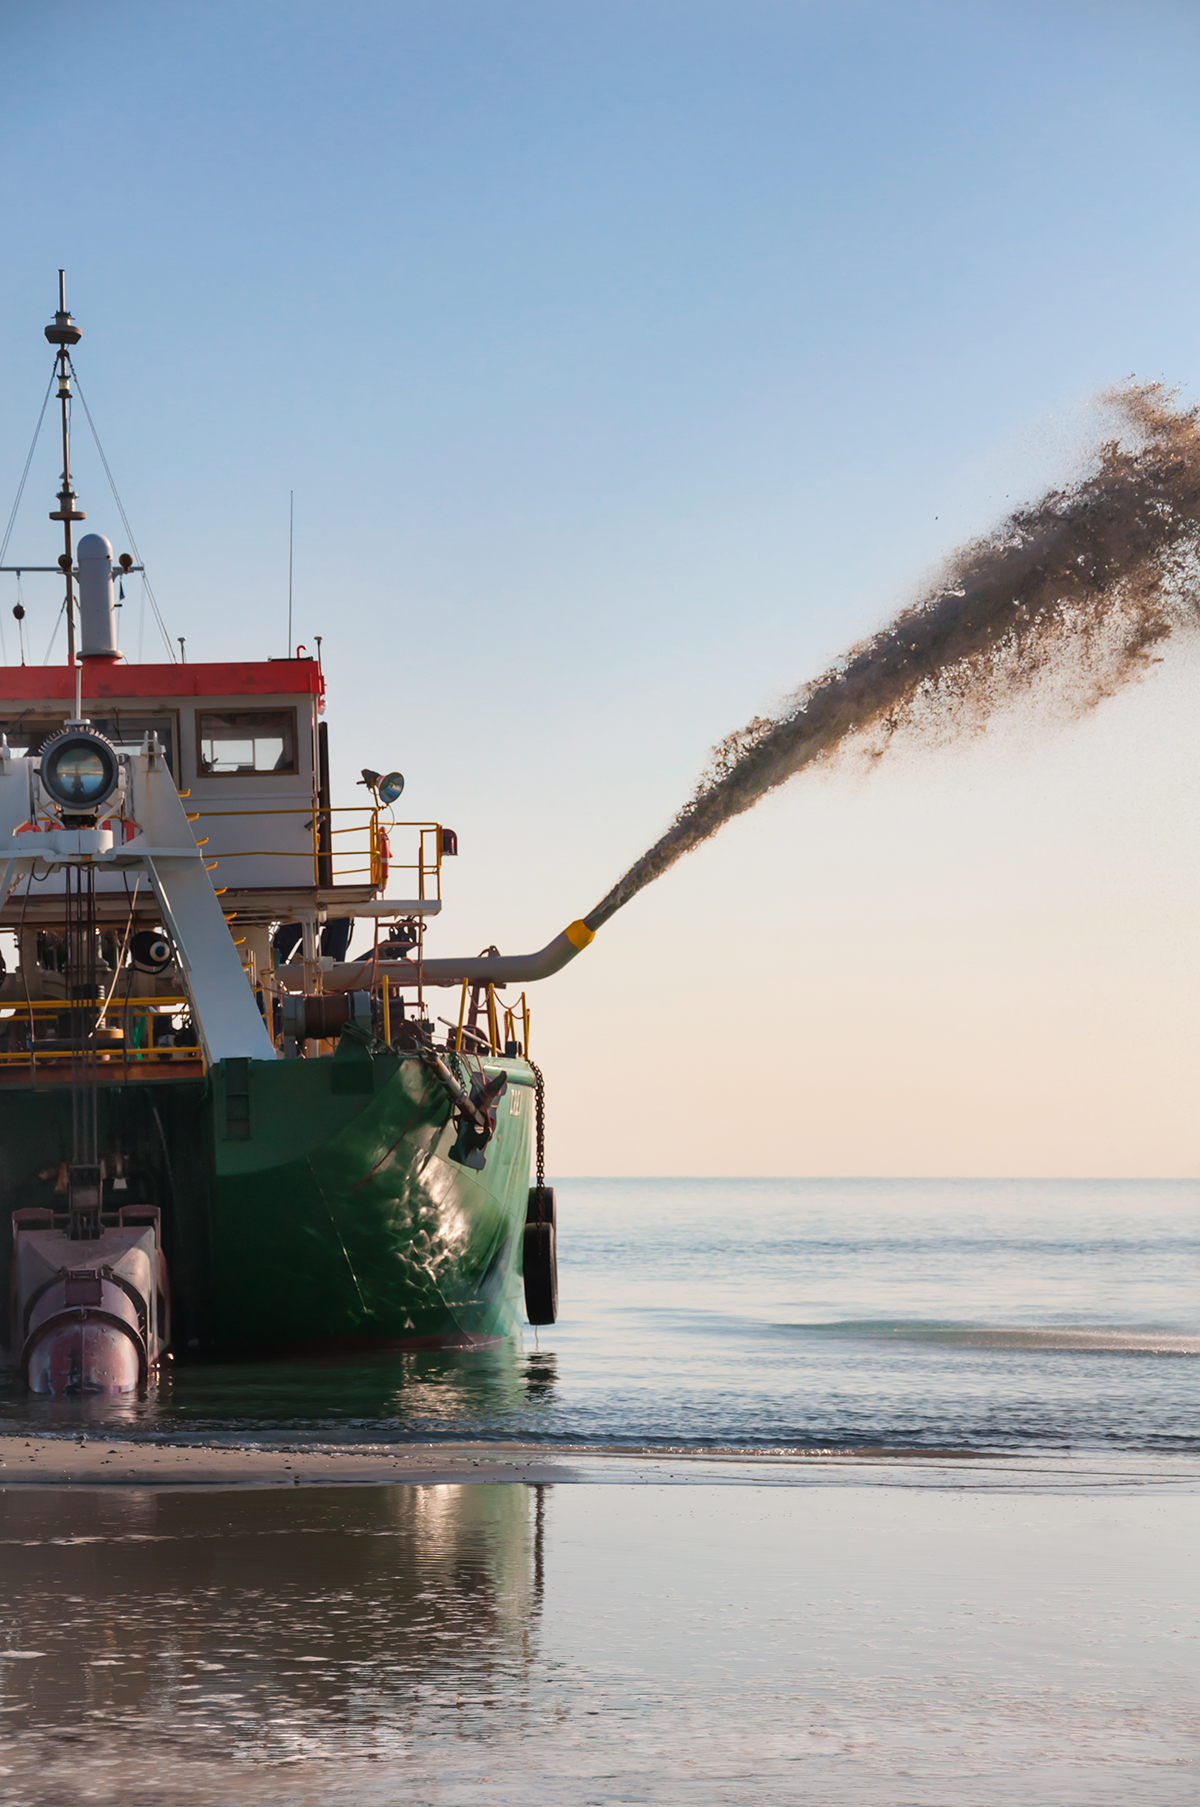 Dredging vessels come in many shapes and sizes. (Image Source: 1: iStock_22733921 / 2: iStock-517381857)